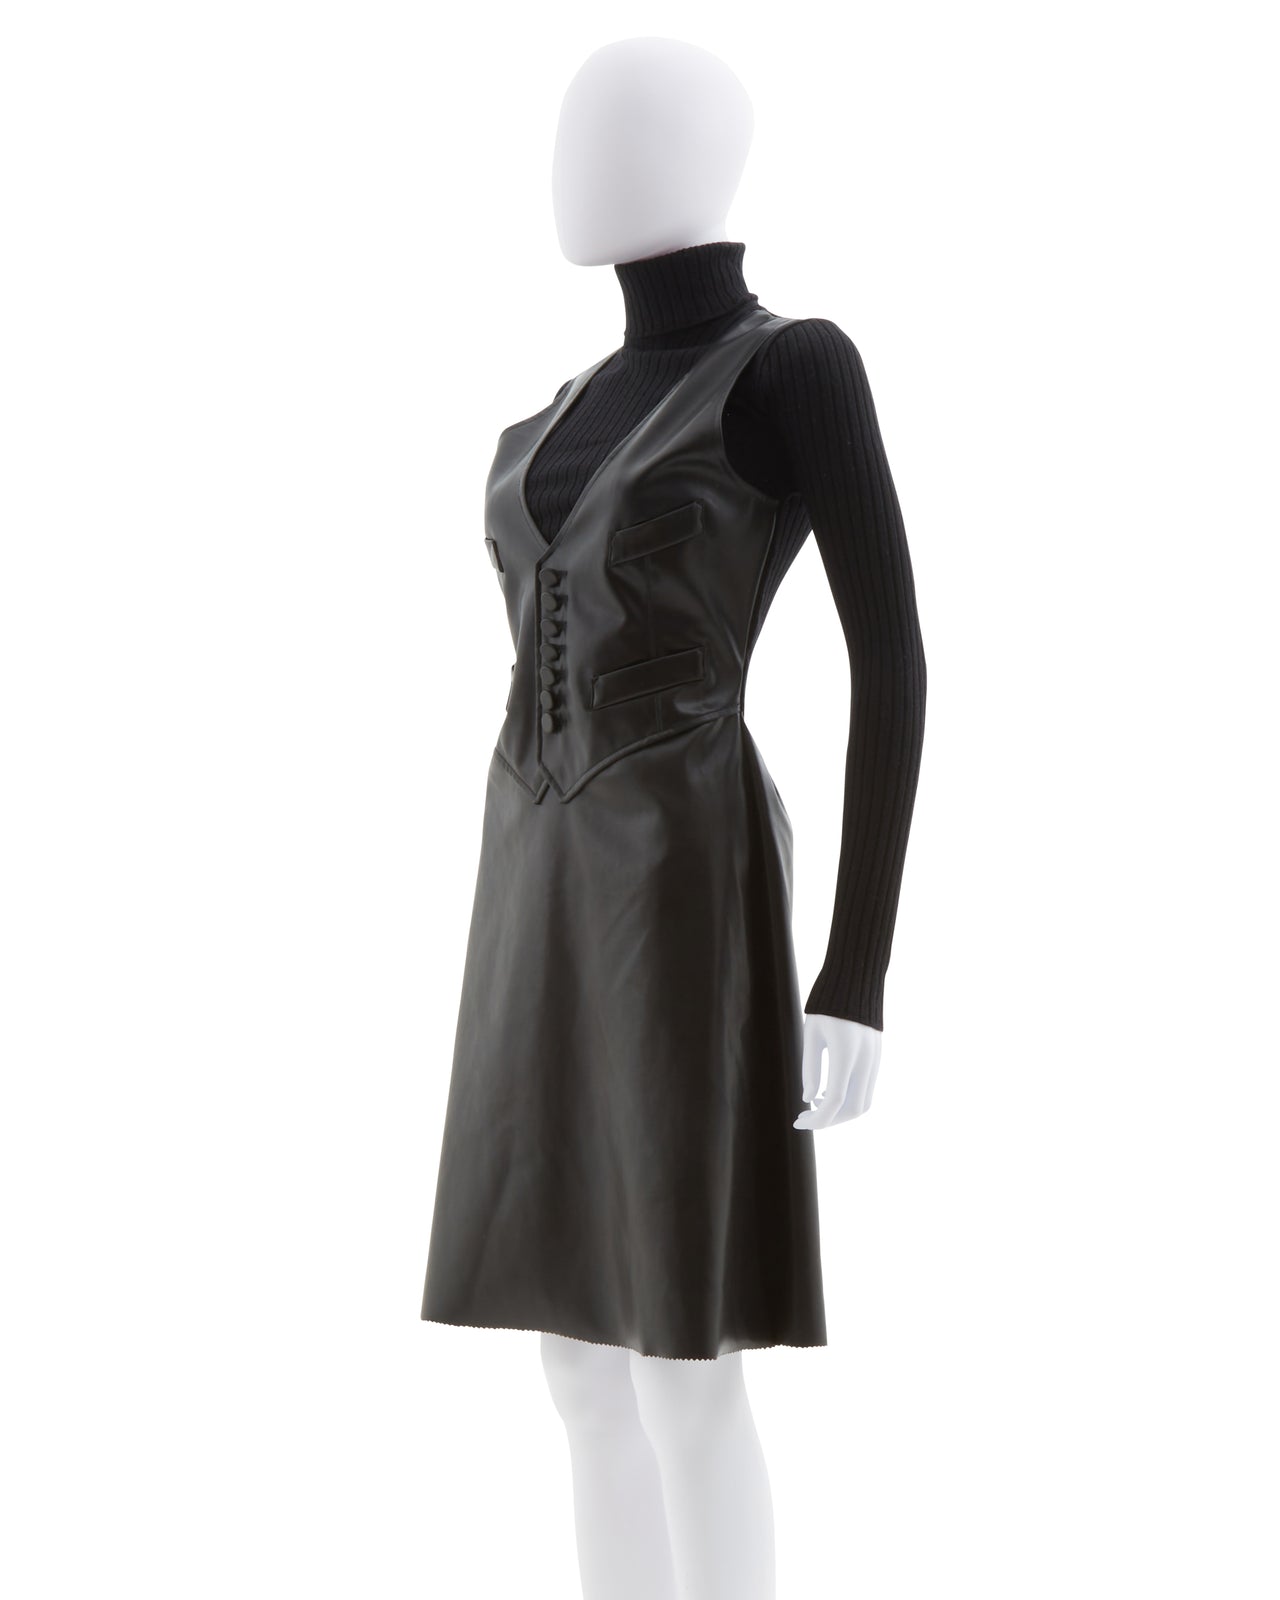 Jean Paul Gaultier Early 2000s black vegan leather & ribbed knit high-neck wool dress